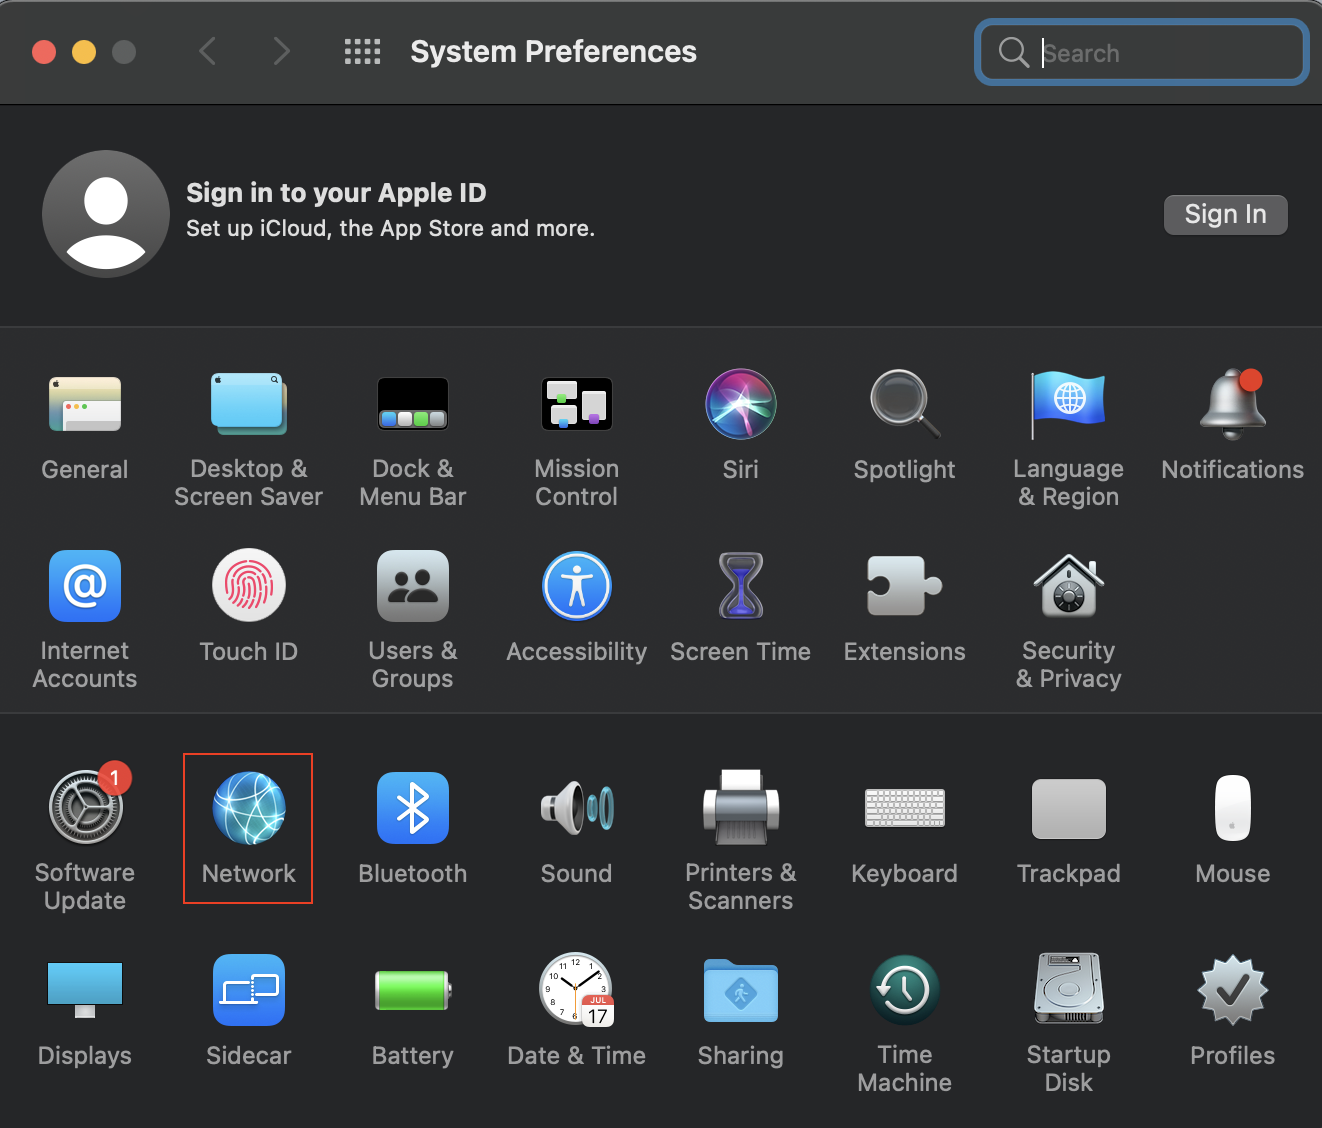 Network location under System Preferences on macOS 